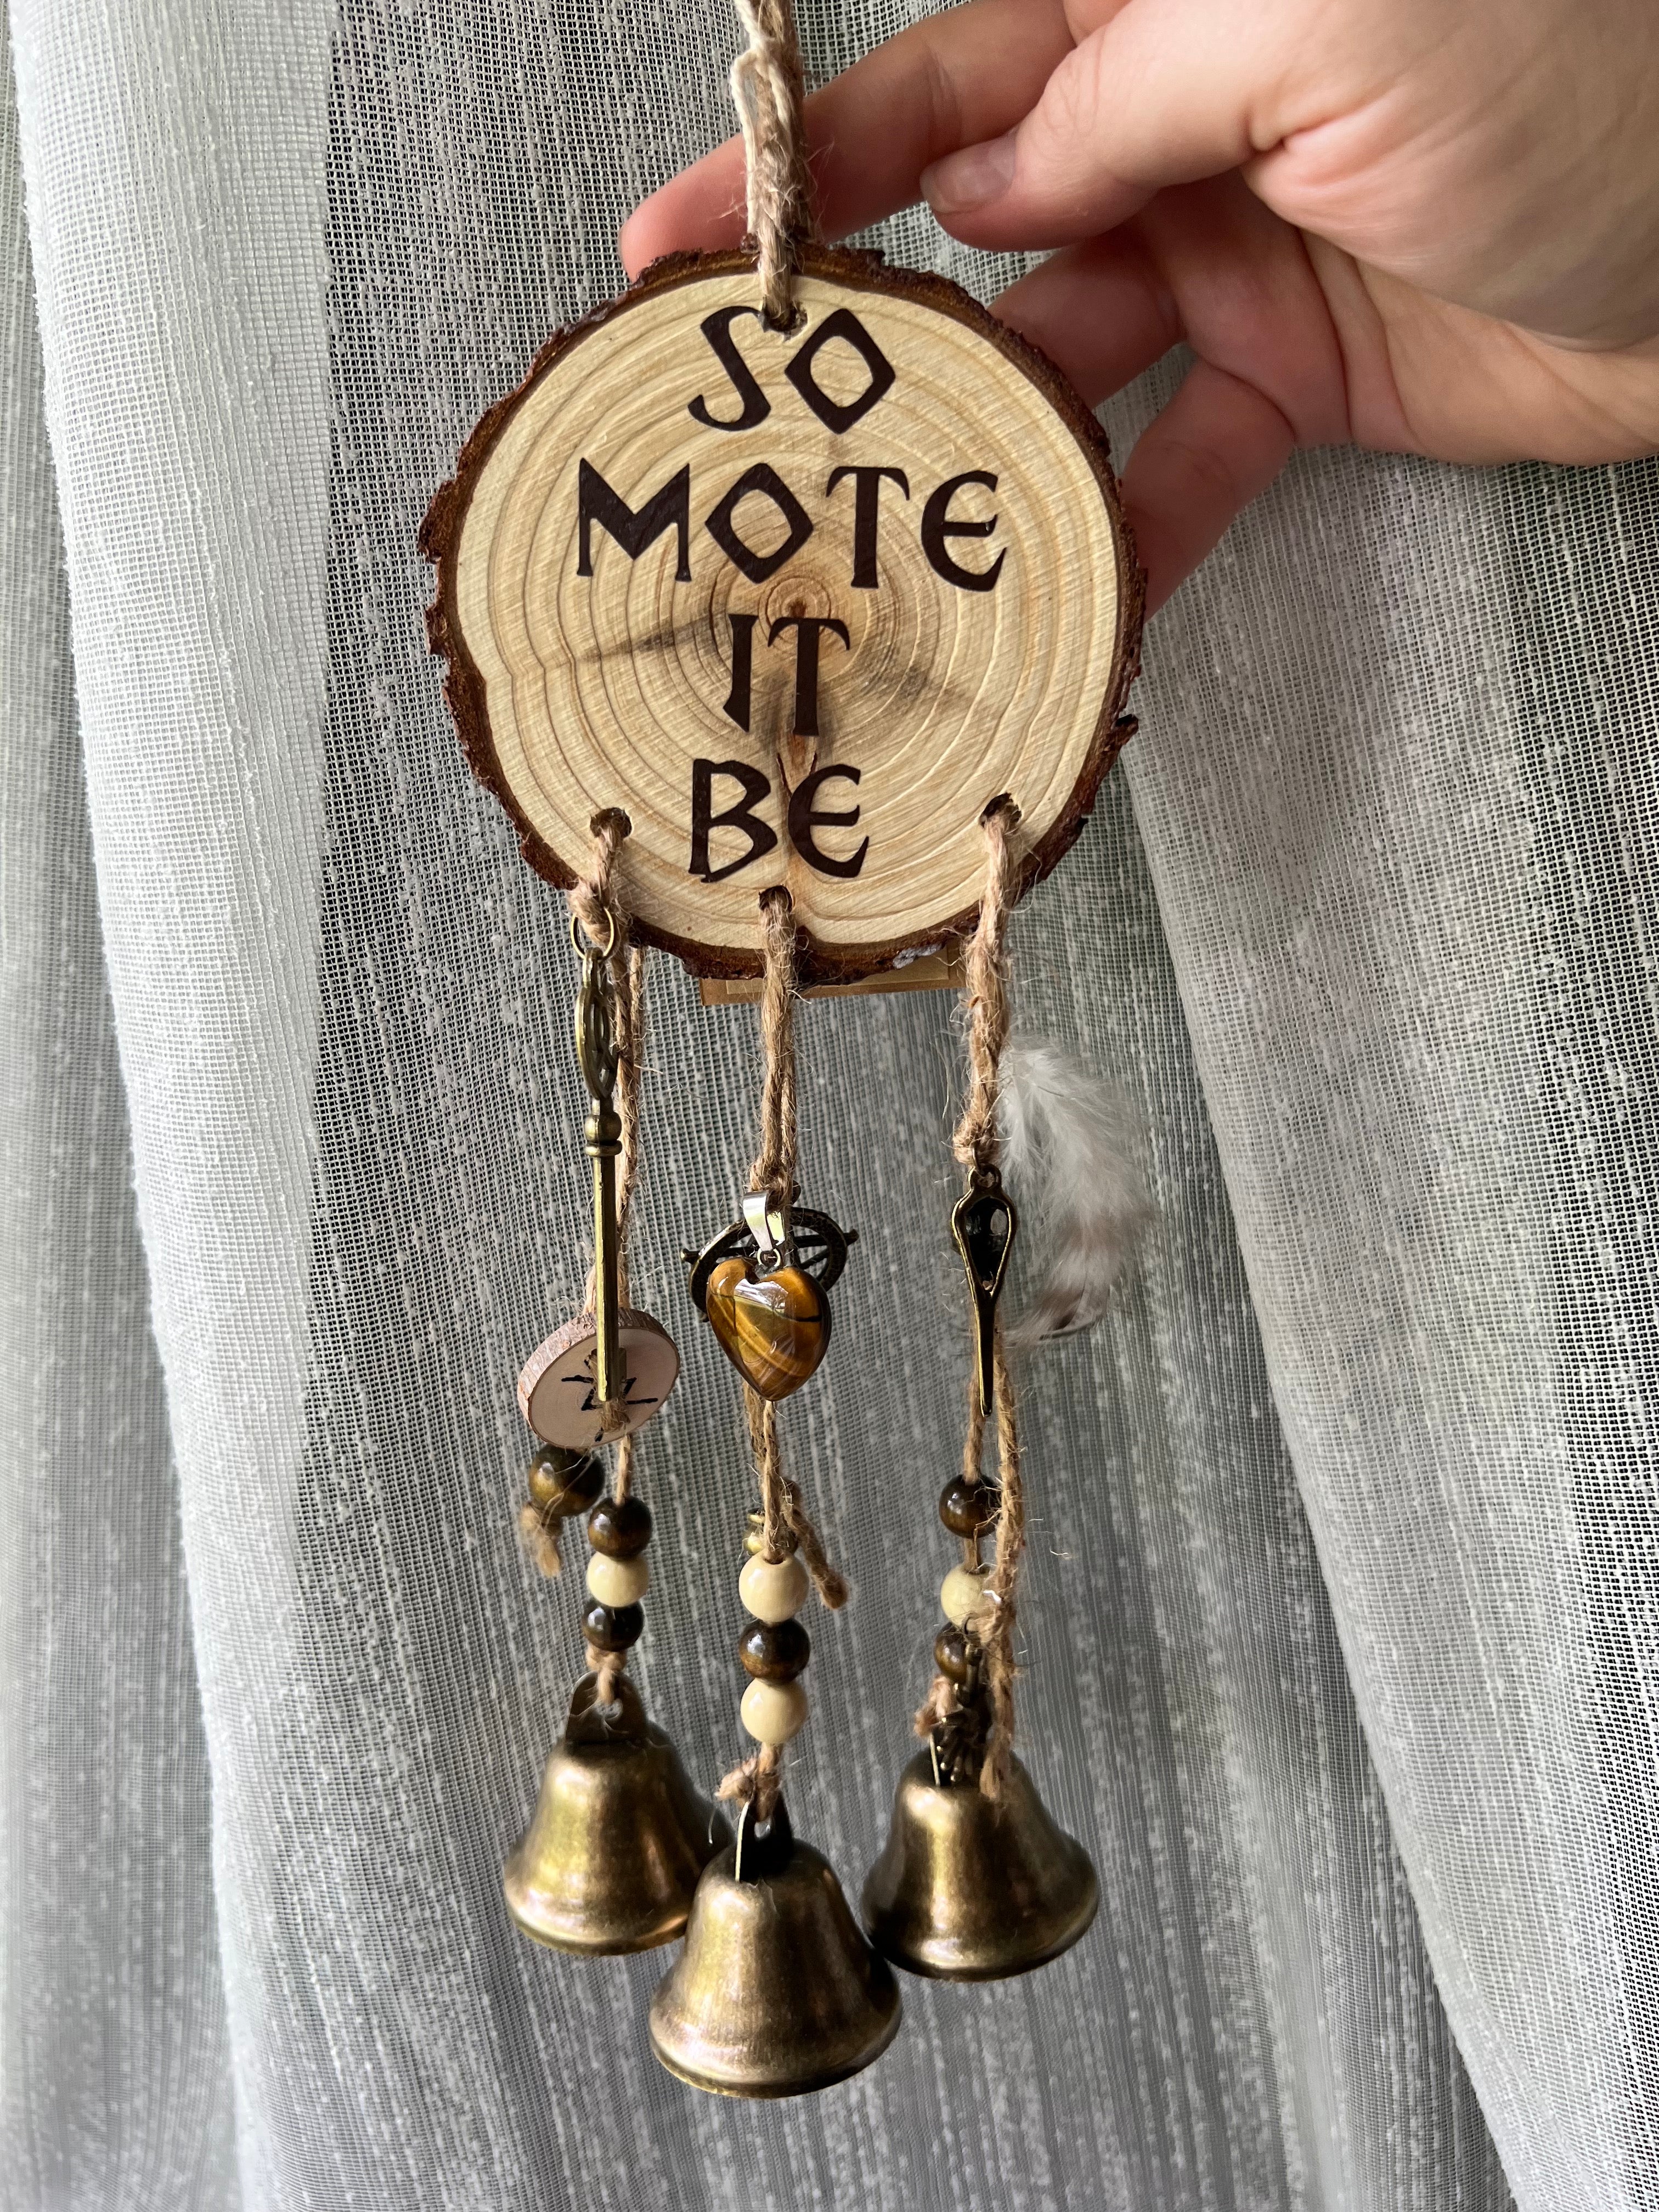 Handmade Witches Bells- So Mote It Be